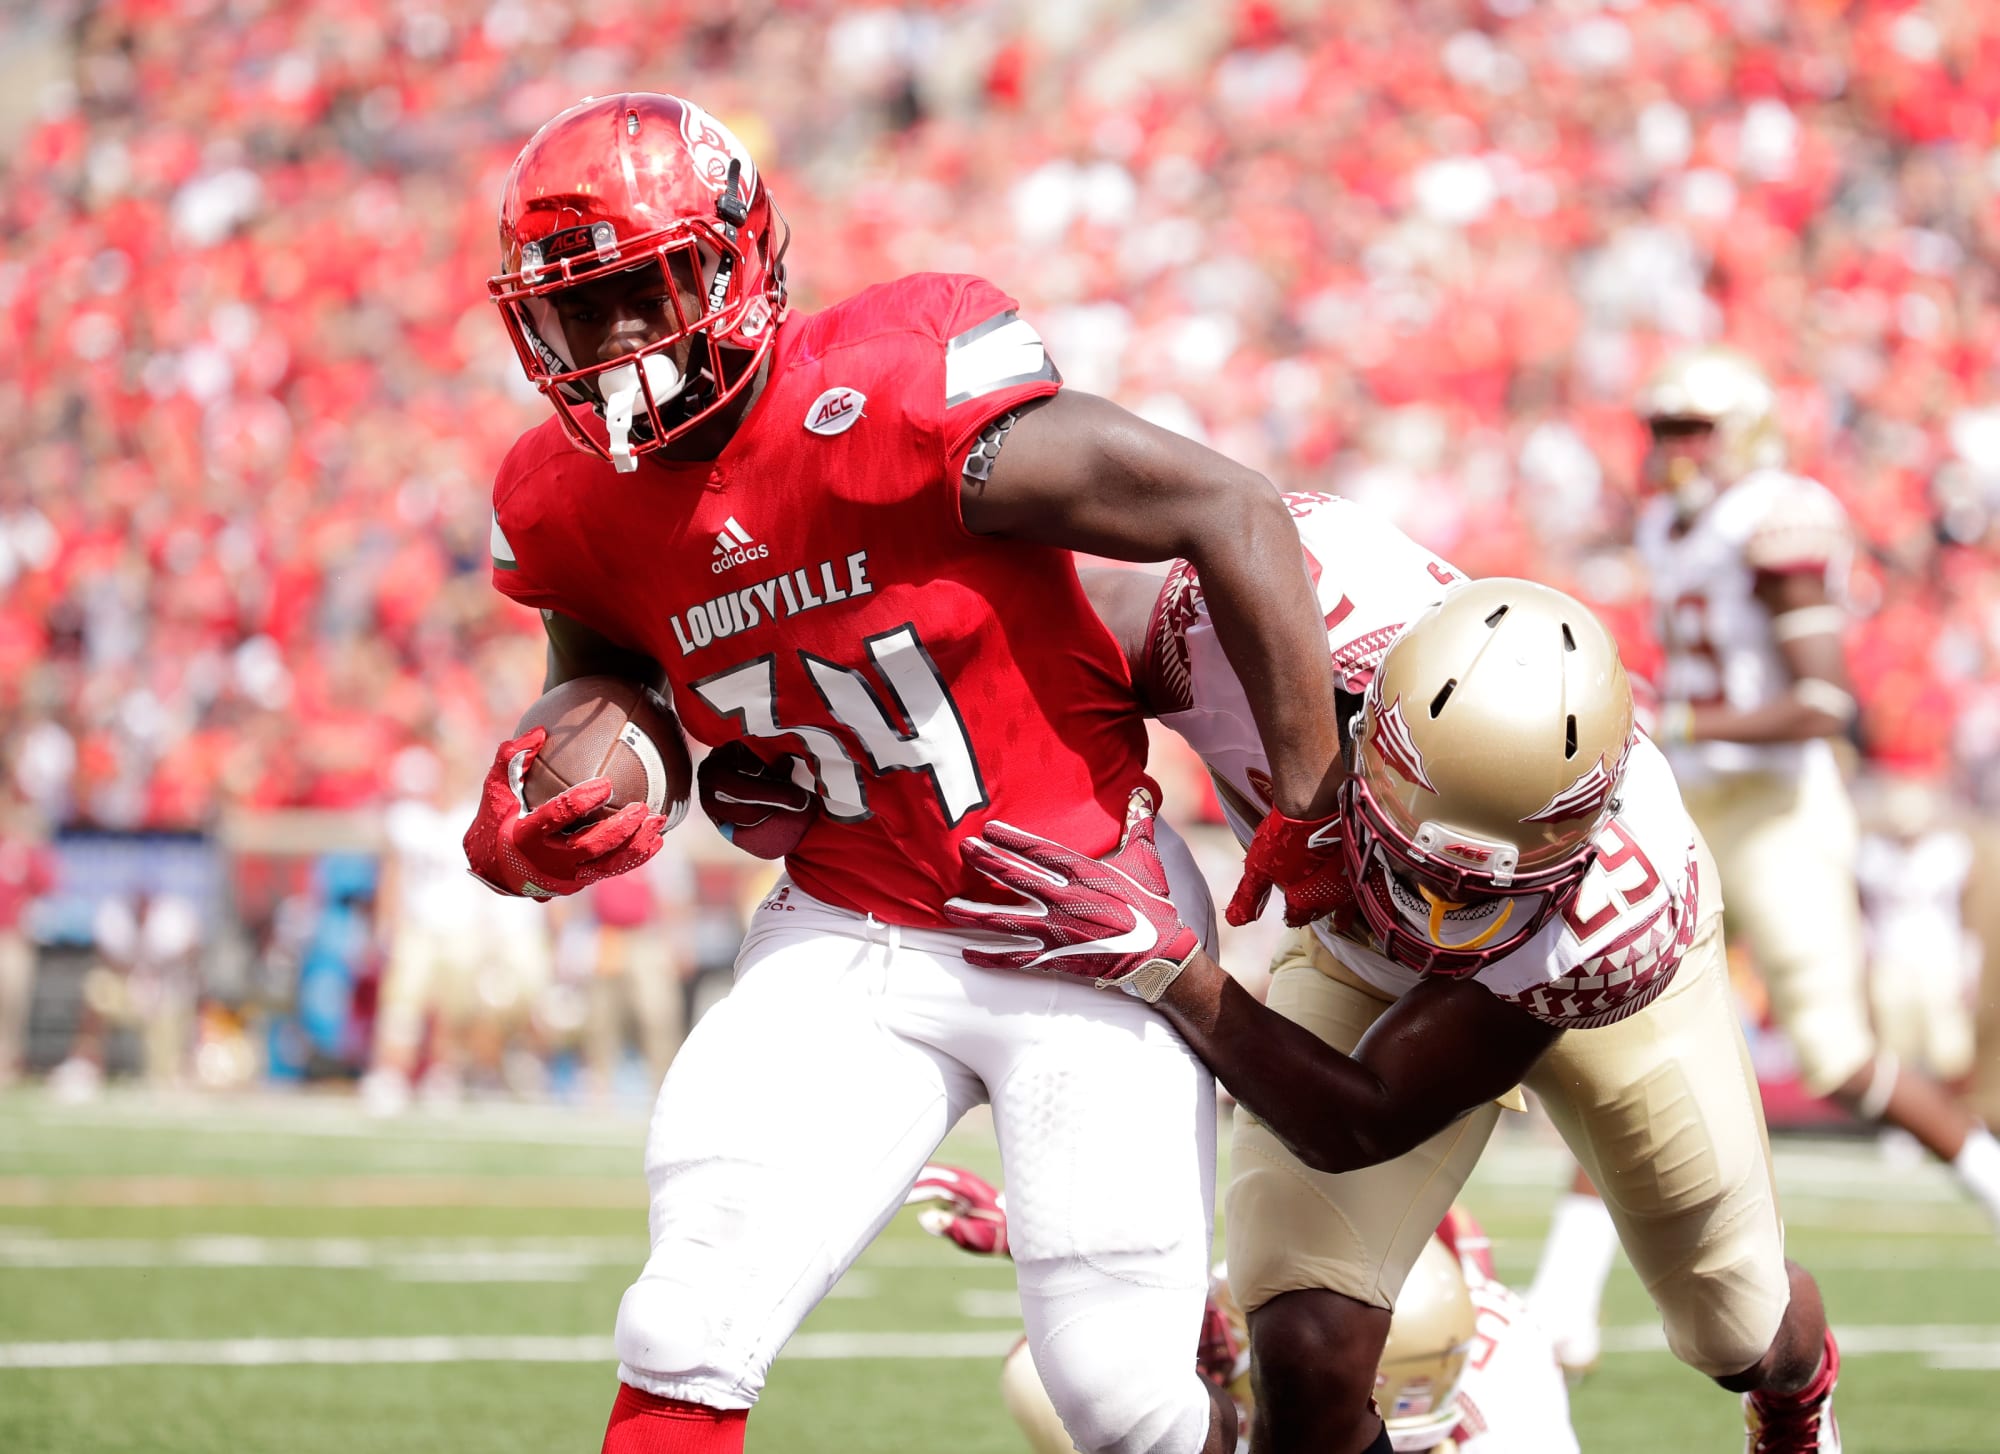 Louisville Football: Cards get additional help in the backfield